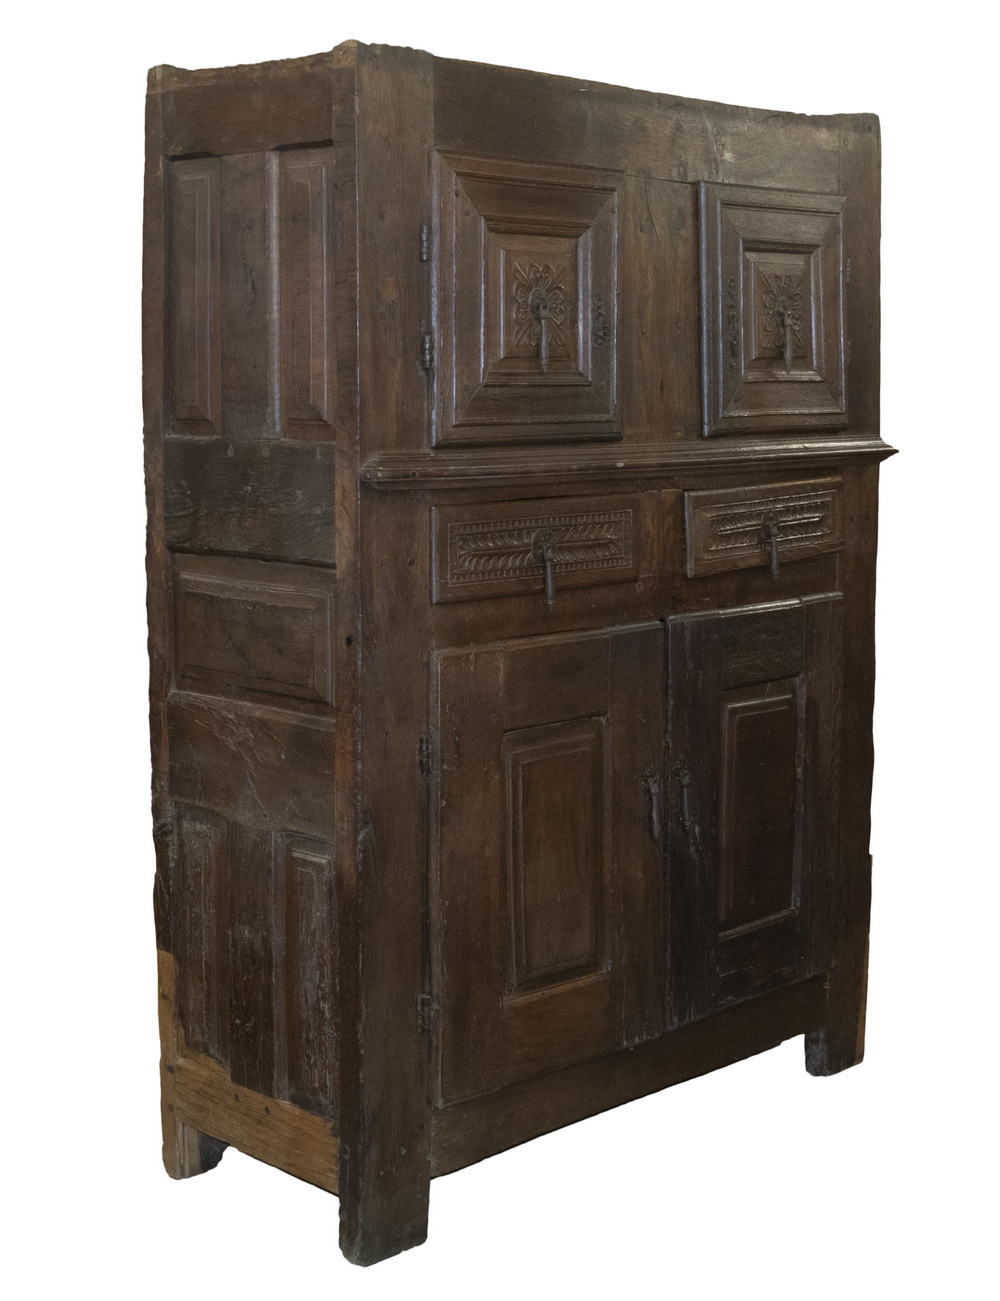 17TH-18TH C. SPANISH COLONIAL CABINET